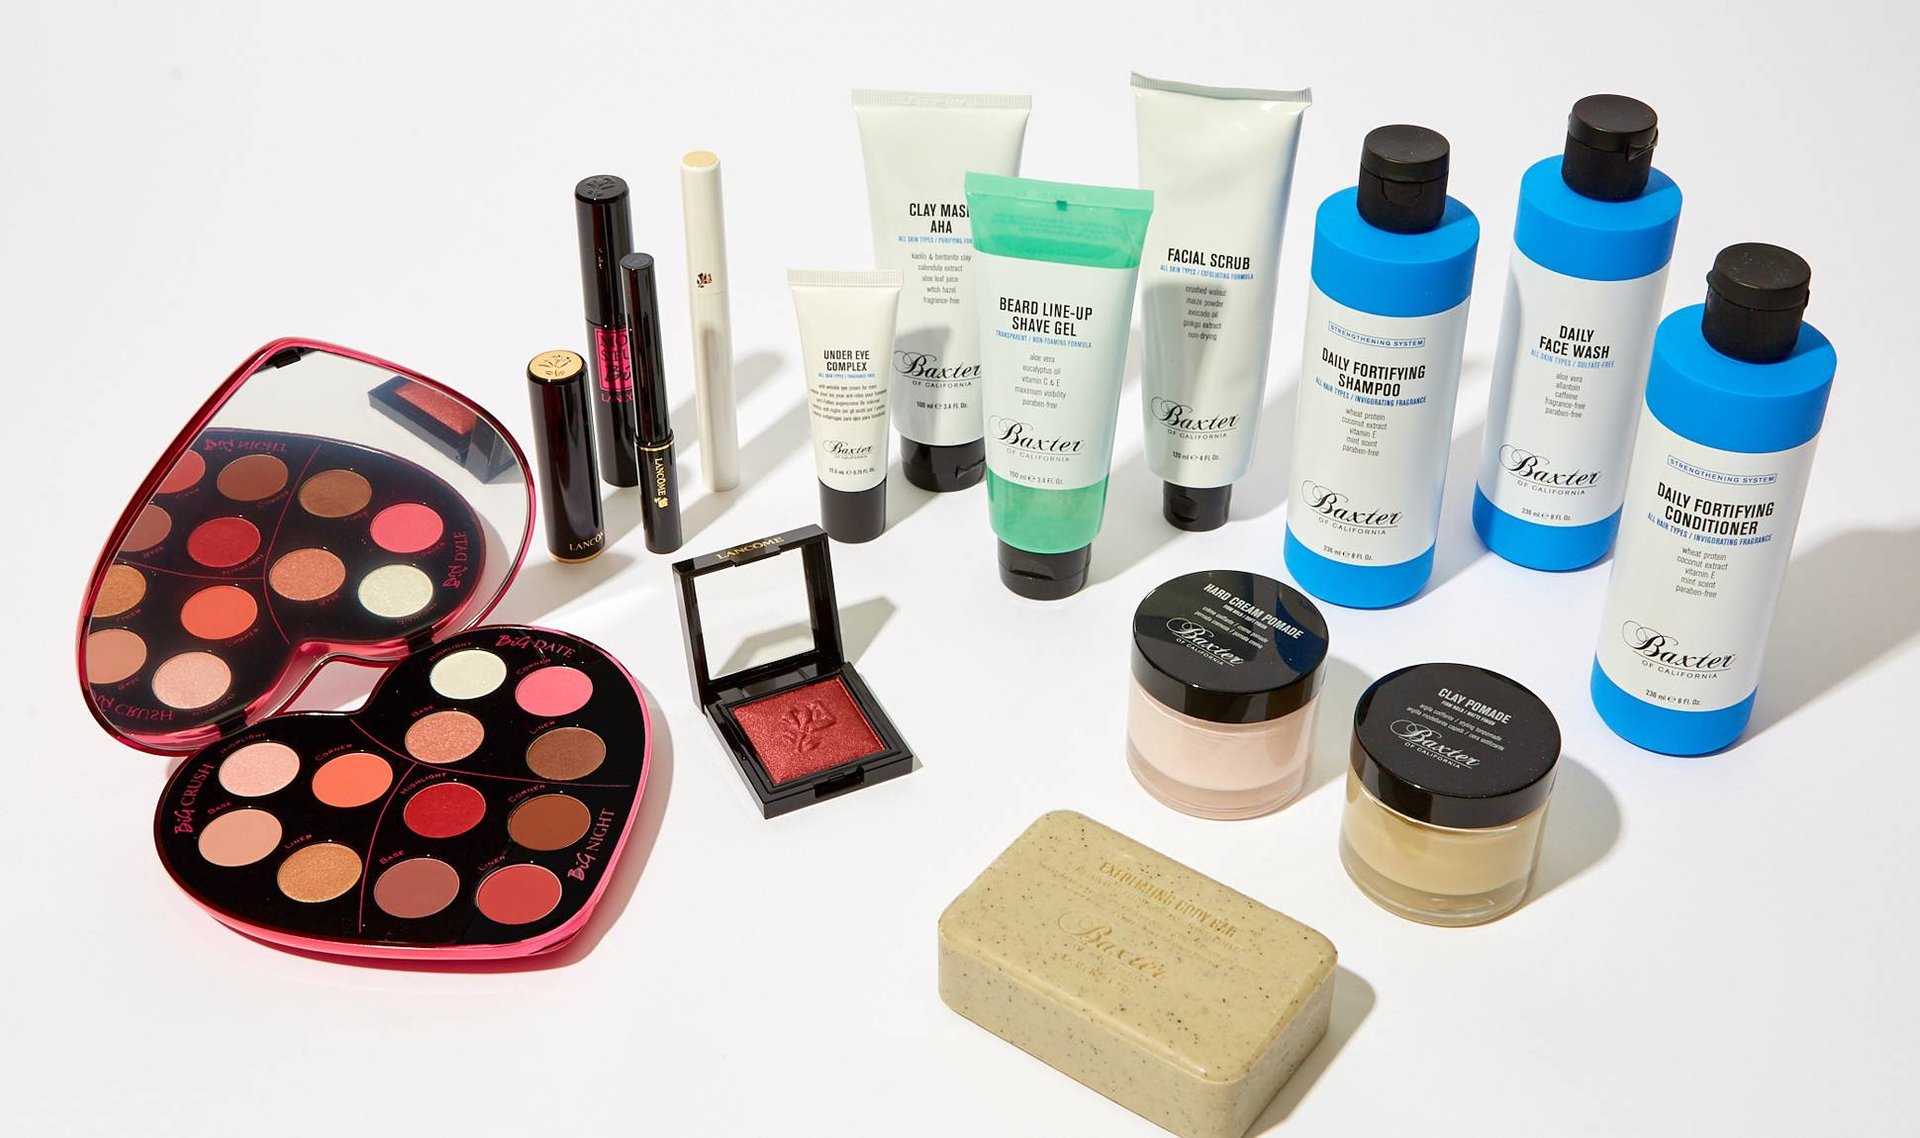 Enter to Win the Ultimate Date-Night Giveaway from Lancôme and Baxter of California